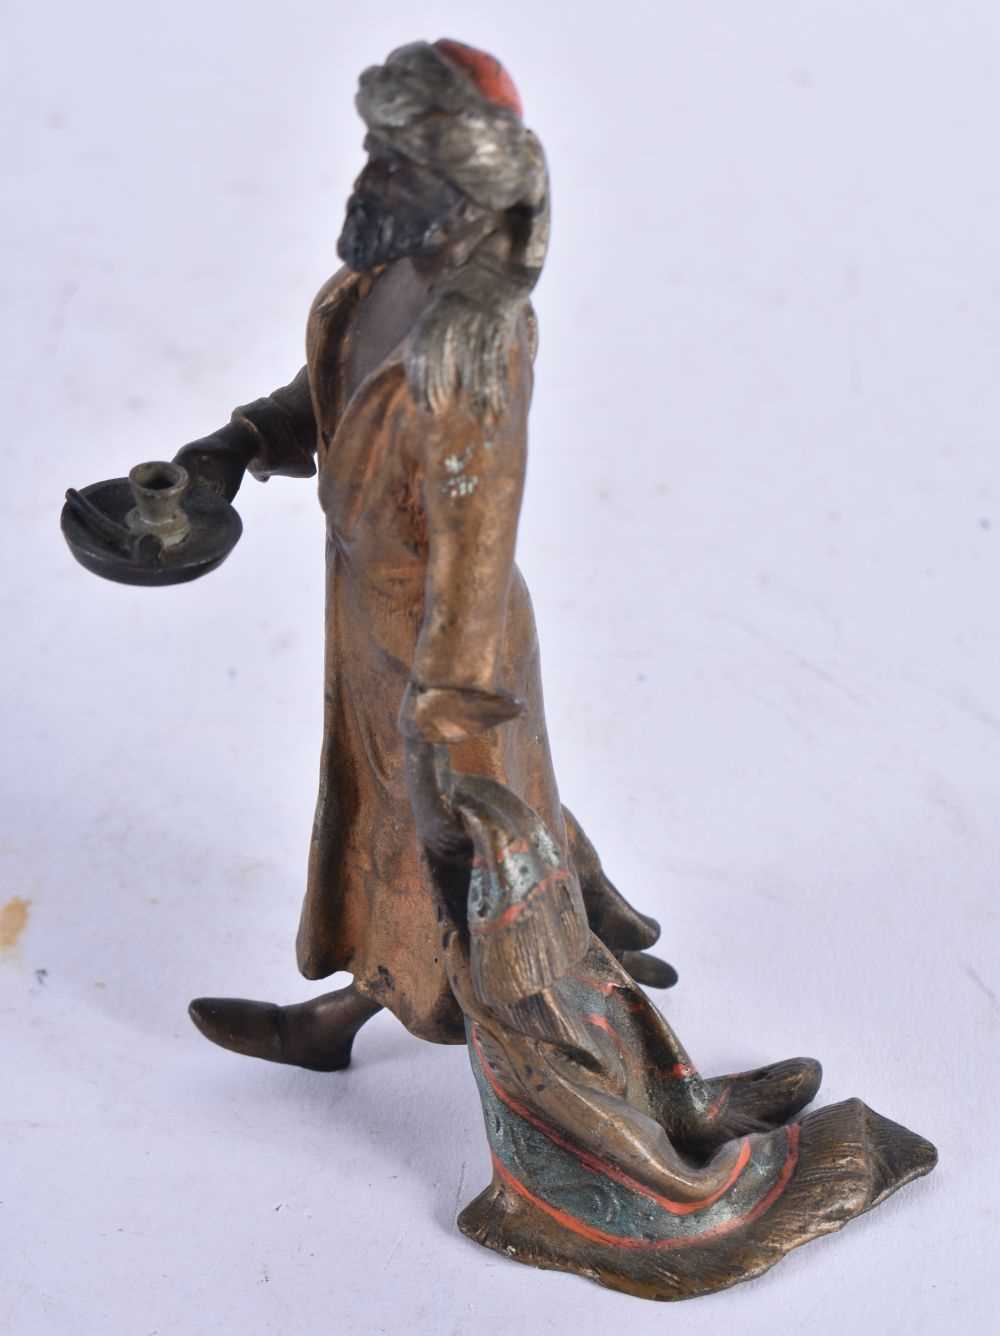 A Cold Painted Bronze in the manner of Bergman od an Arab Lighting his way to Bed. 9.2 cm x 6.2 cm x - Image 2 of 4